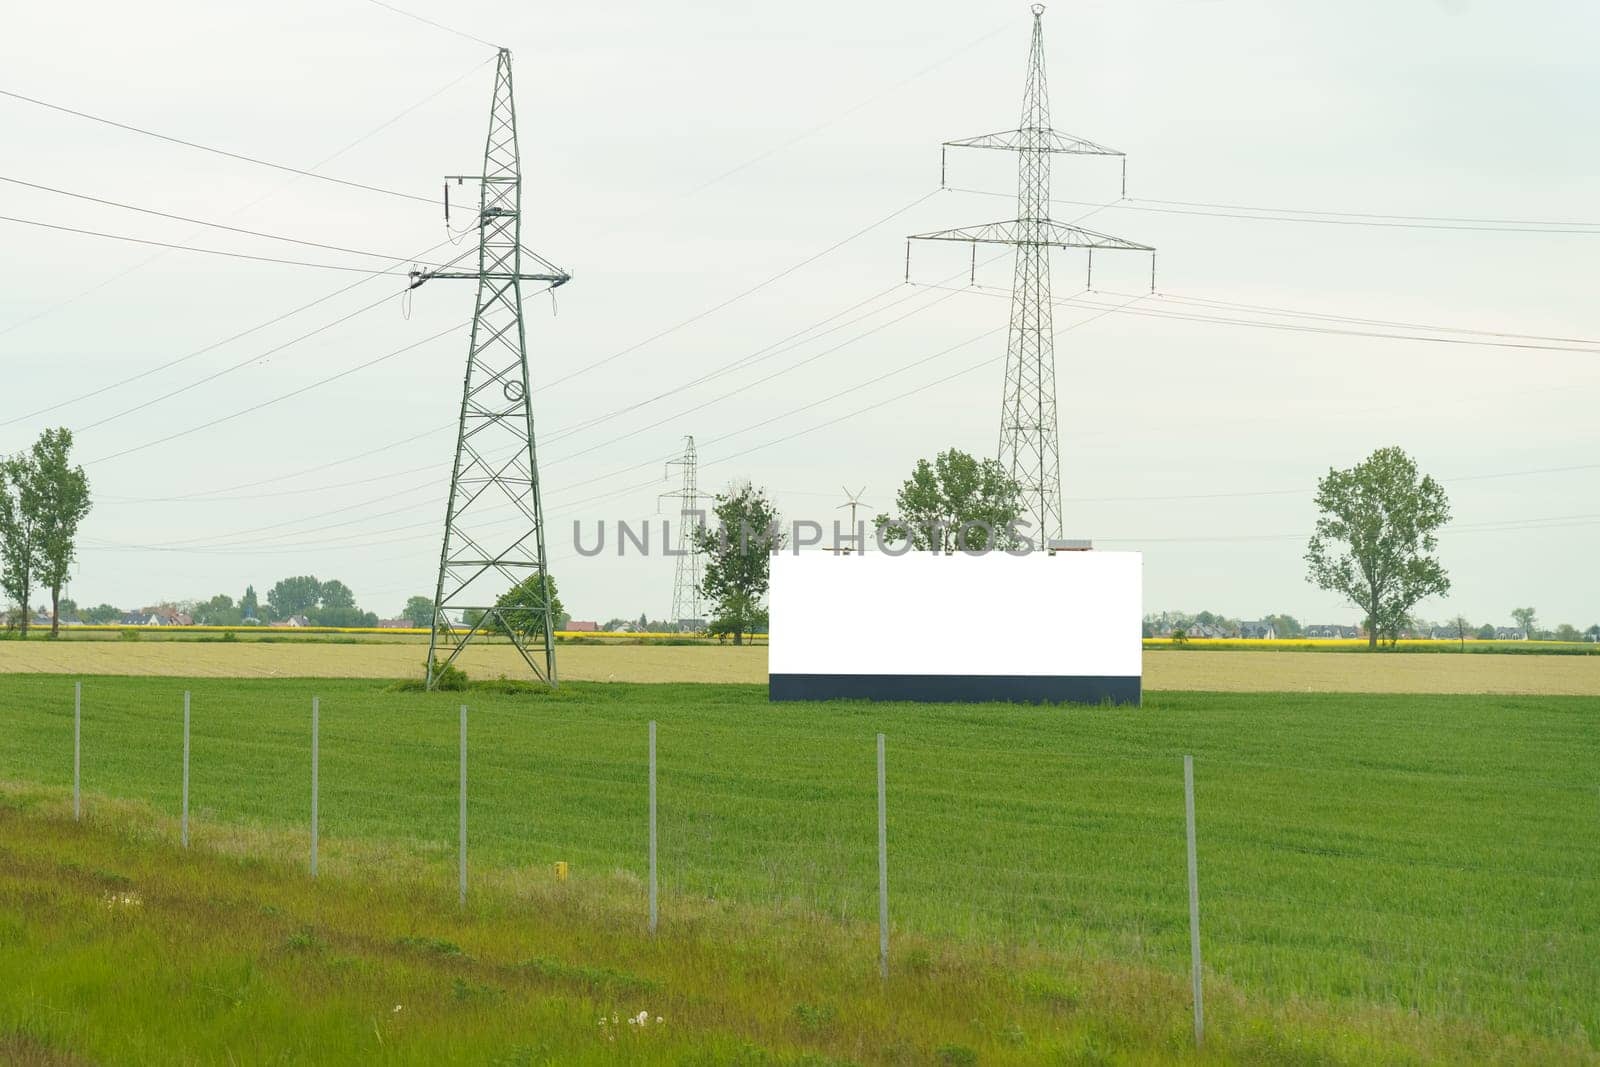 A large billboard standing prominently on the side of the road by Sd28DimoN_1976